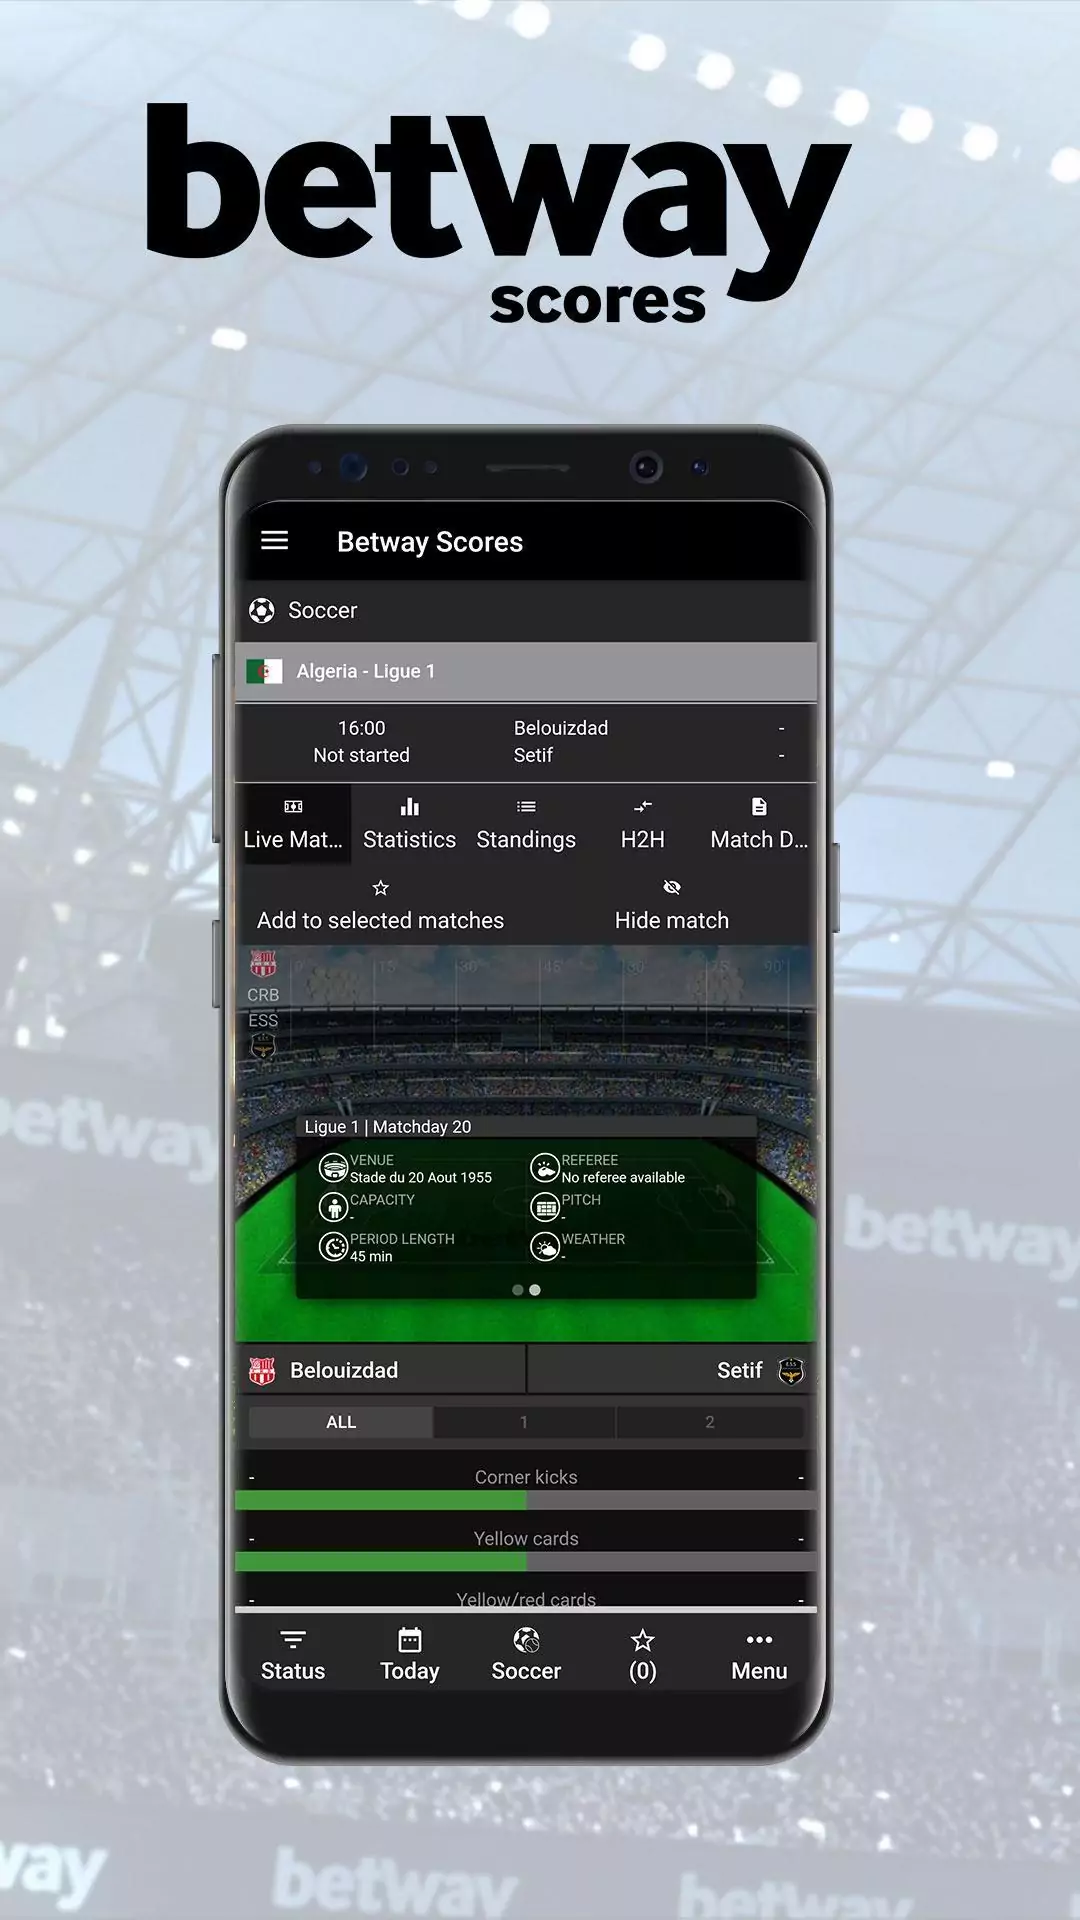 The Betway app for Android